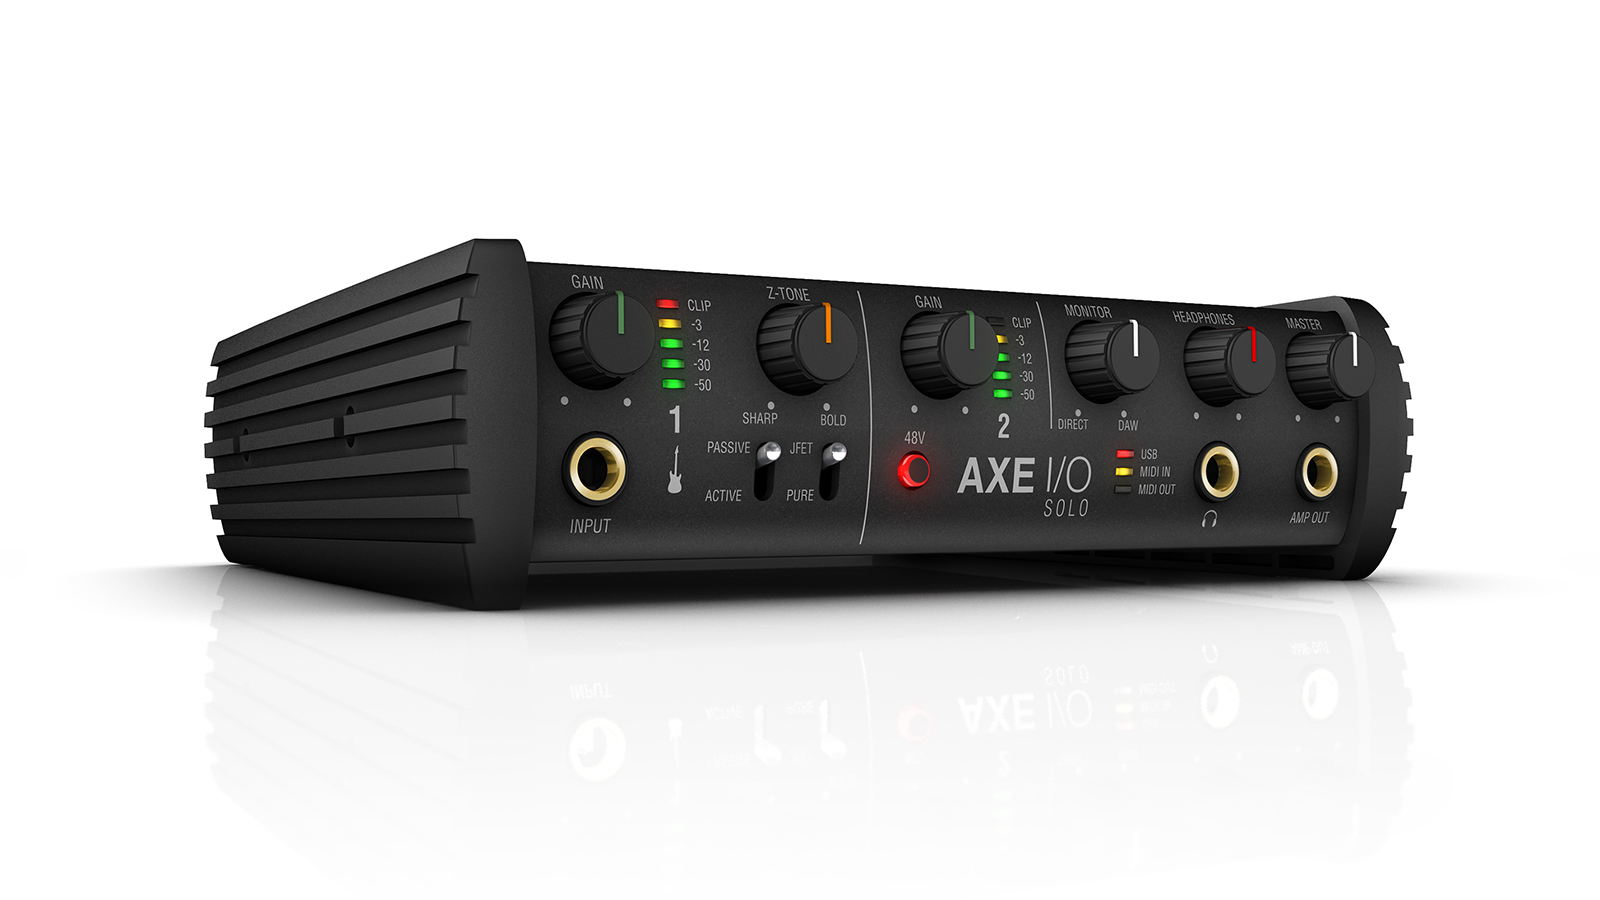 Record your guitar for less with $50 off IK Multimedia's Axe I/O